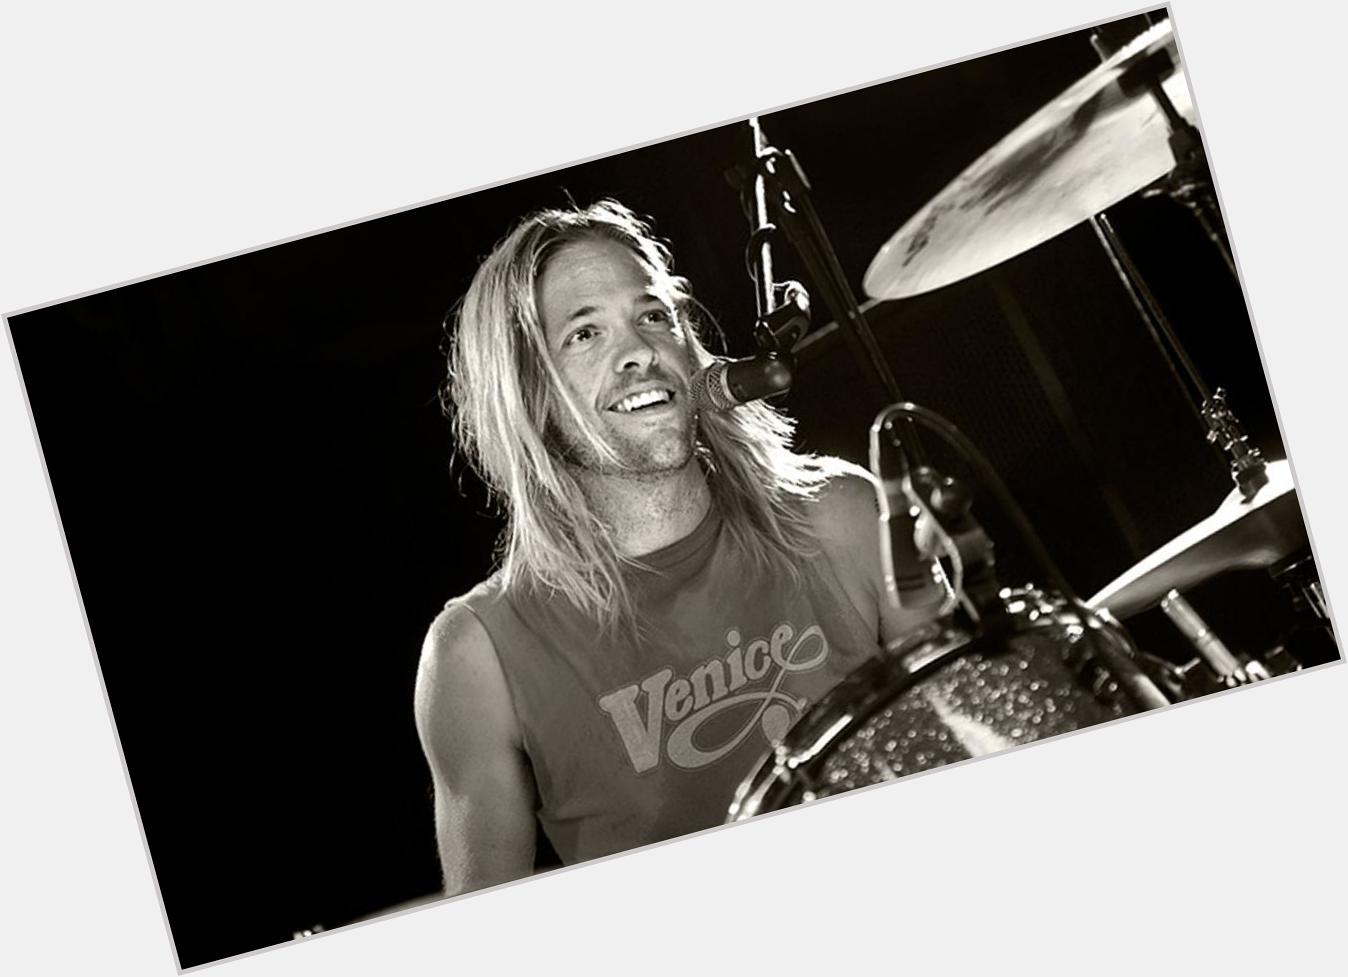 There goes my hero, watch him as he goes. Happy birthday Taylor Hawkins  